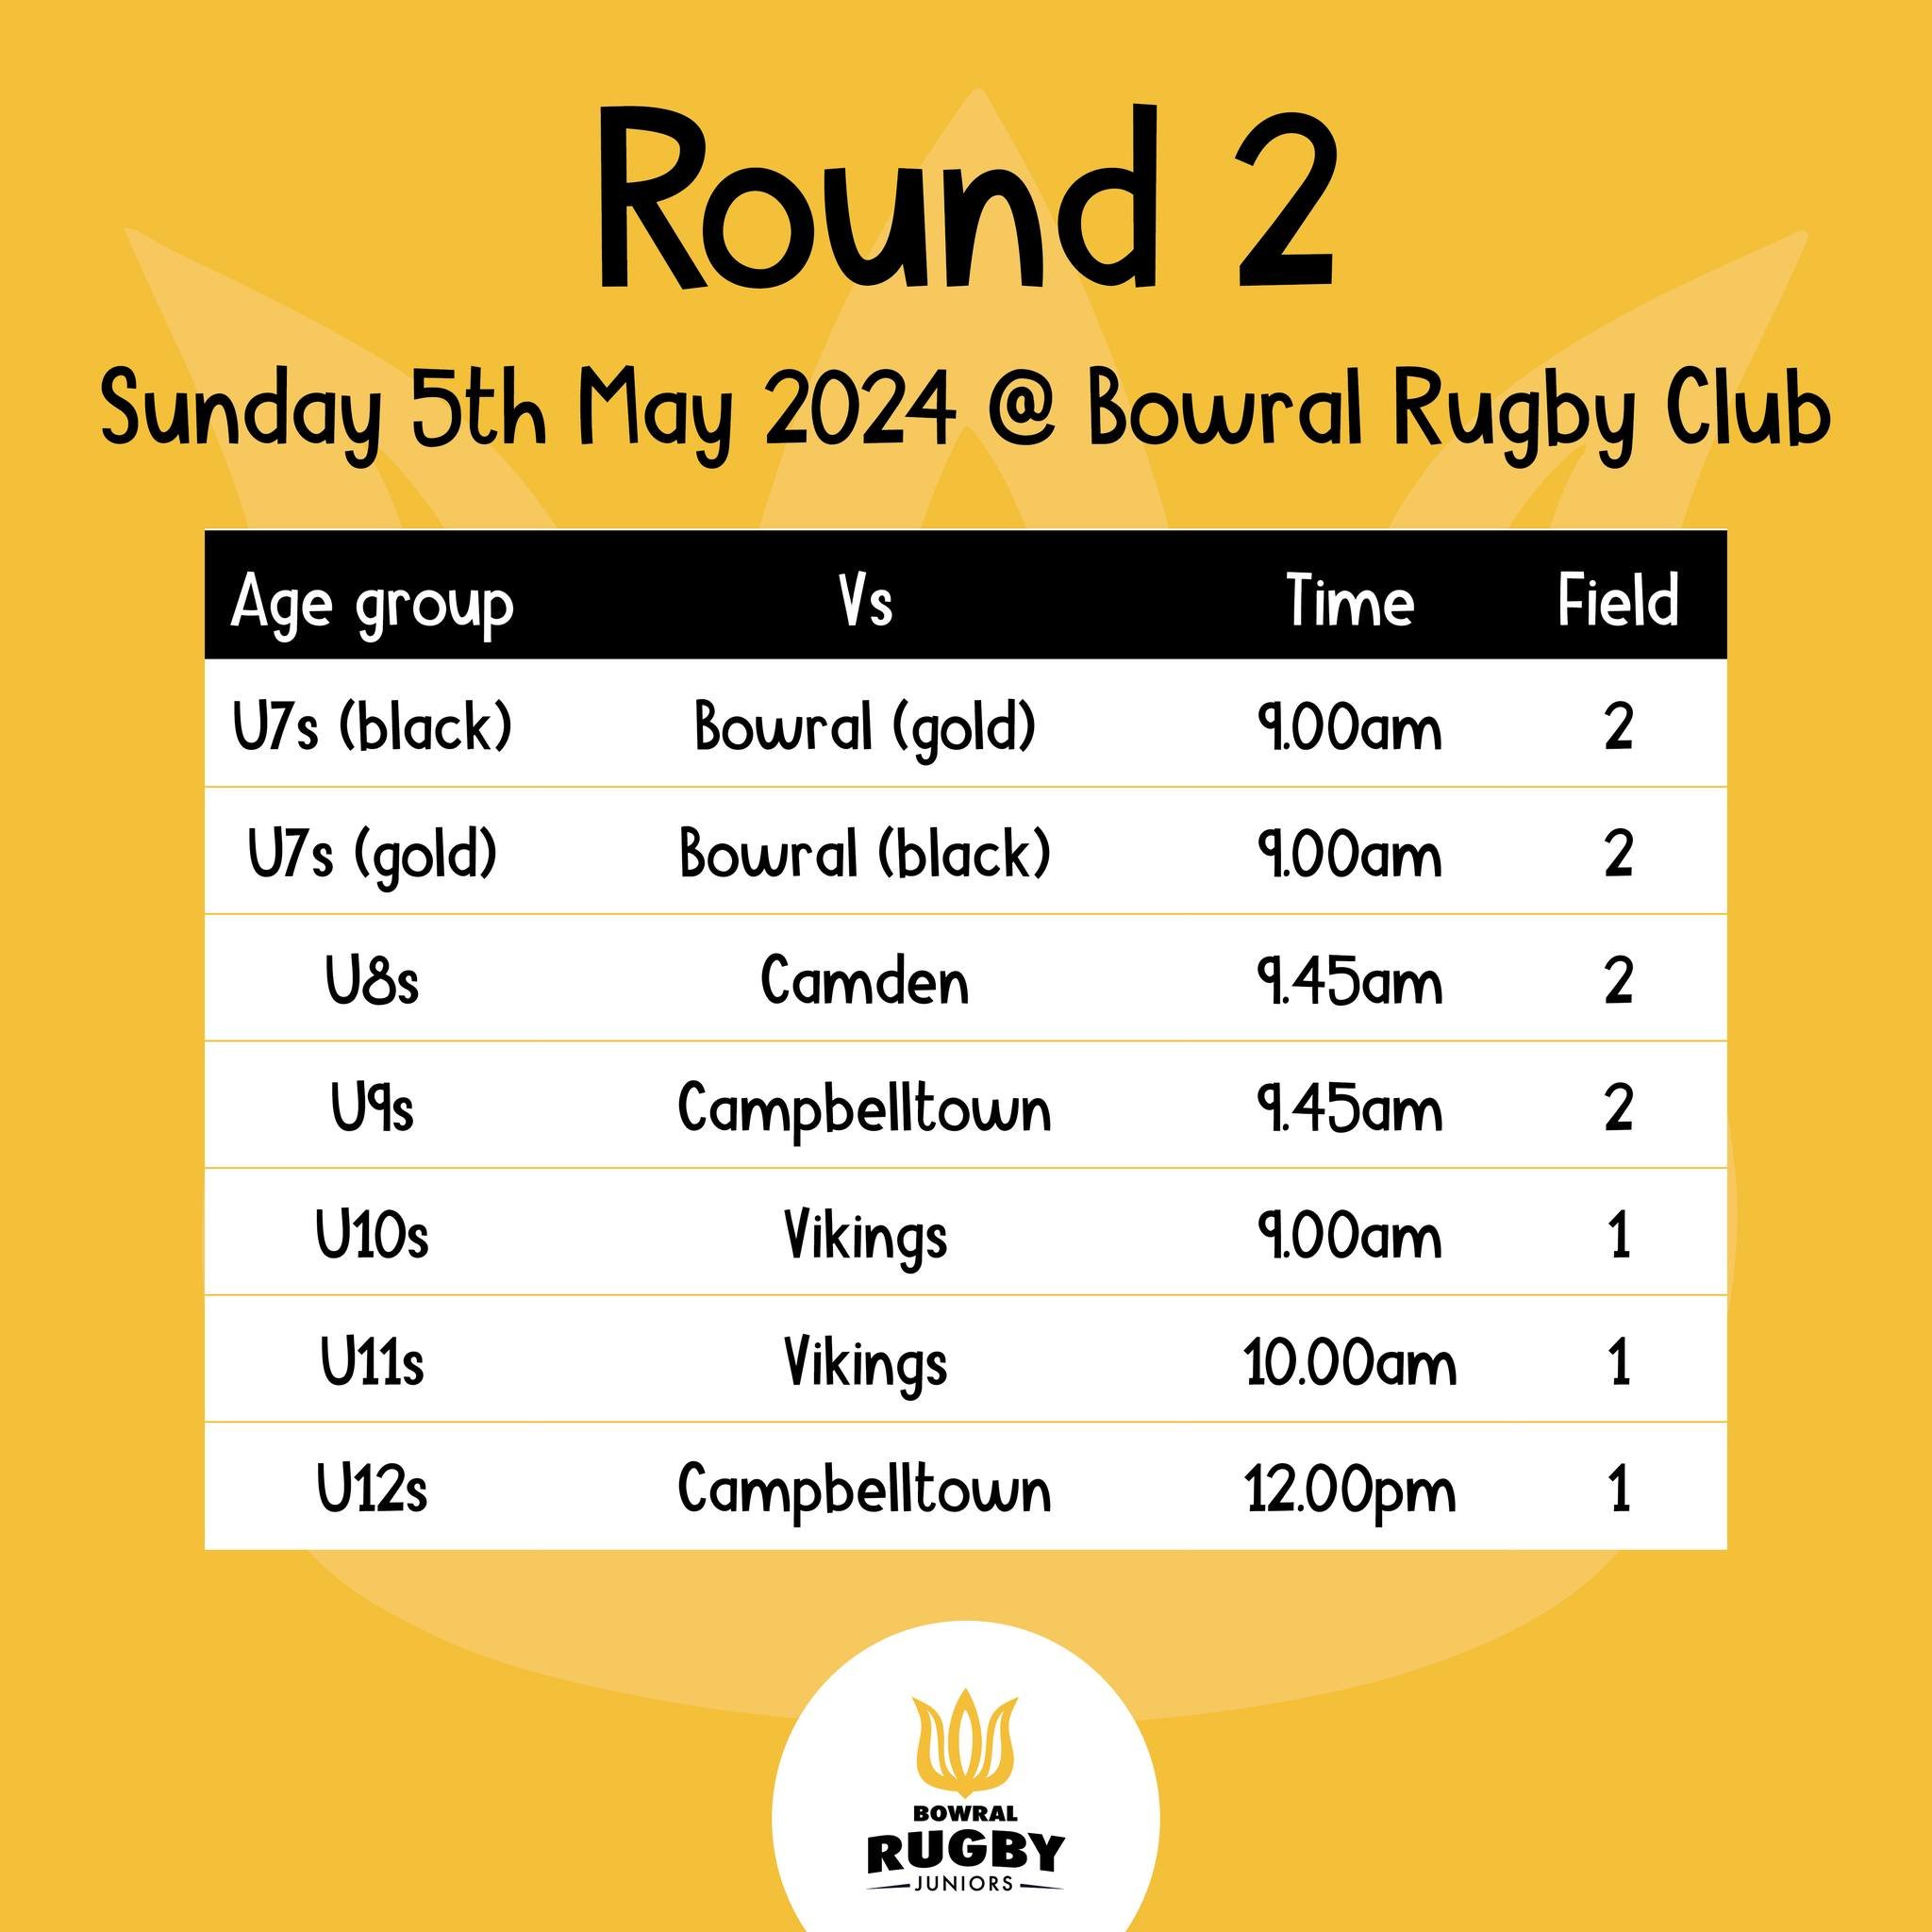 The round 2 schedule is up and all teams are playing at home this Sunday.

Keep an eye on your teams WhatsApp for any updates that may occur.

Please note that Rugby Explorer was showing some conflicting times and teams, but this is the latest update